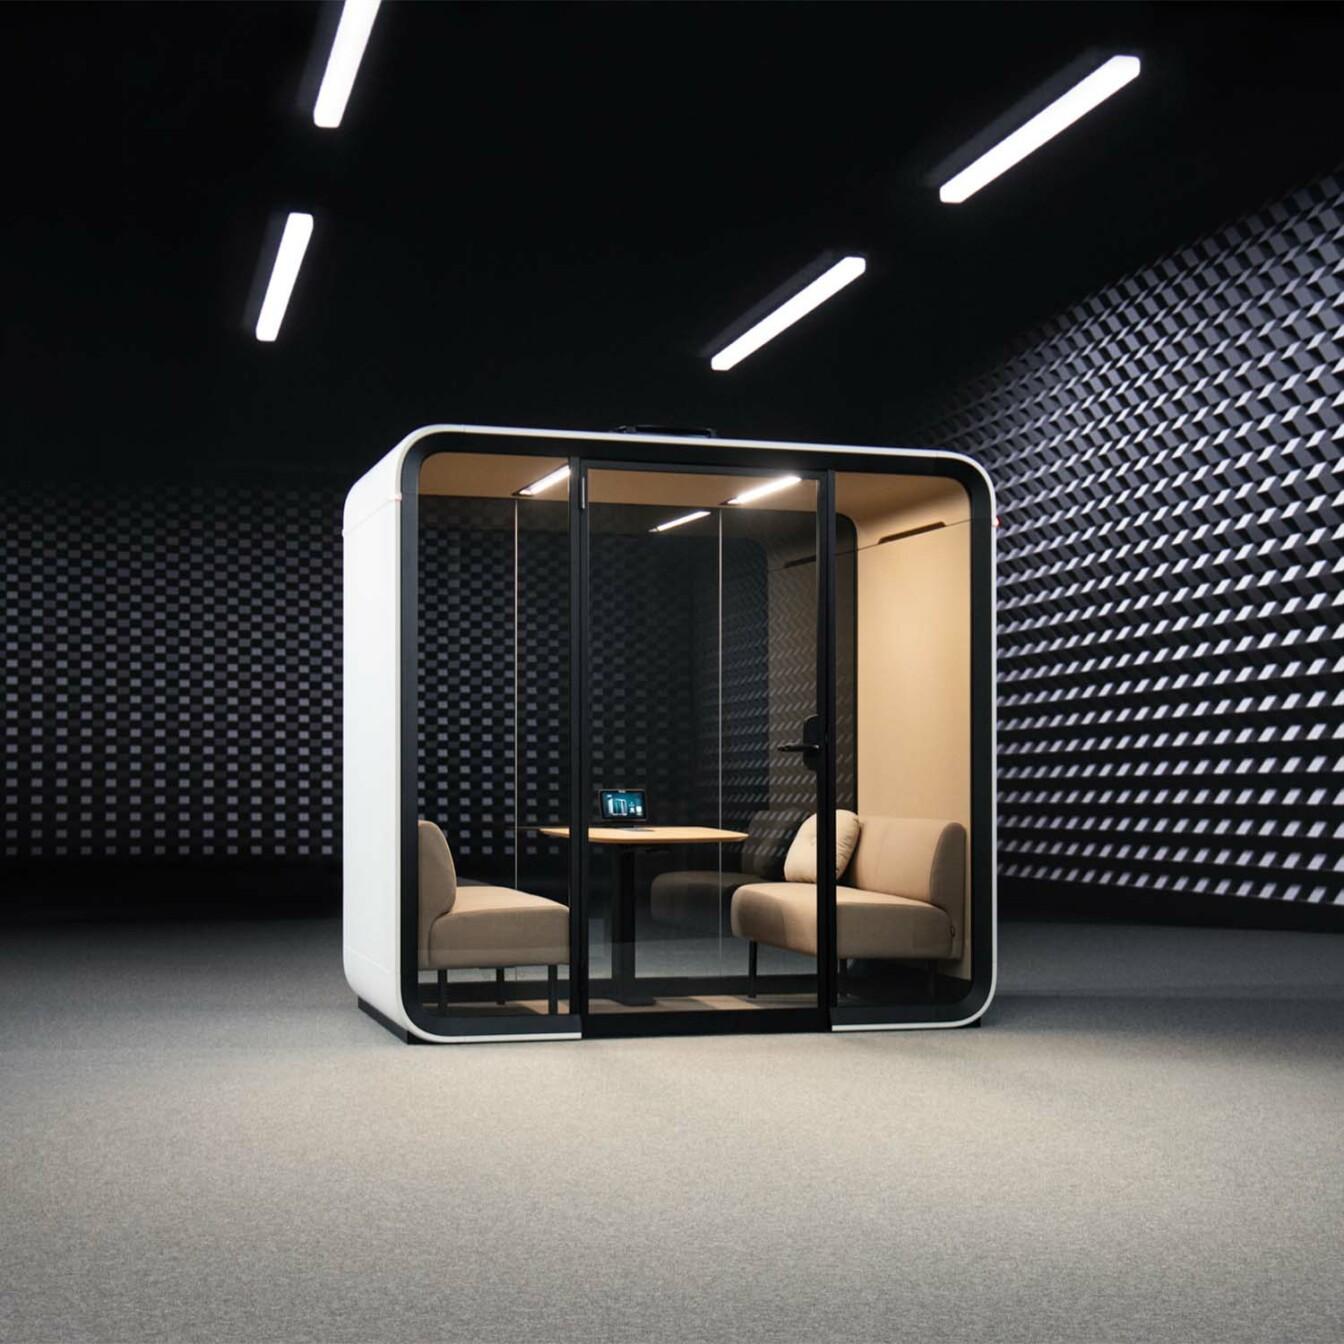 Framery Four meeting pod in an acoustic testing environment